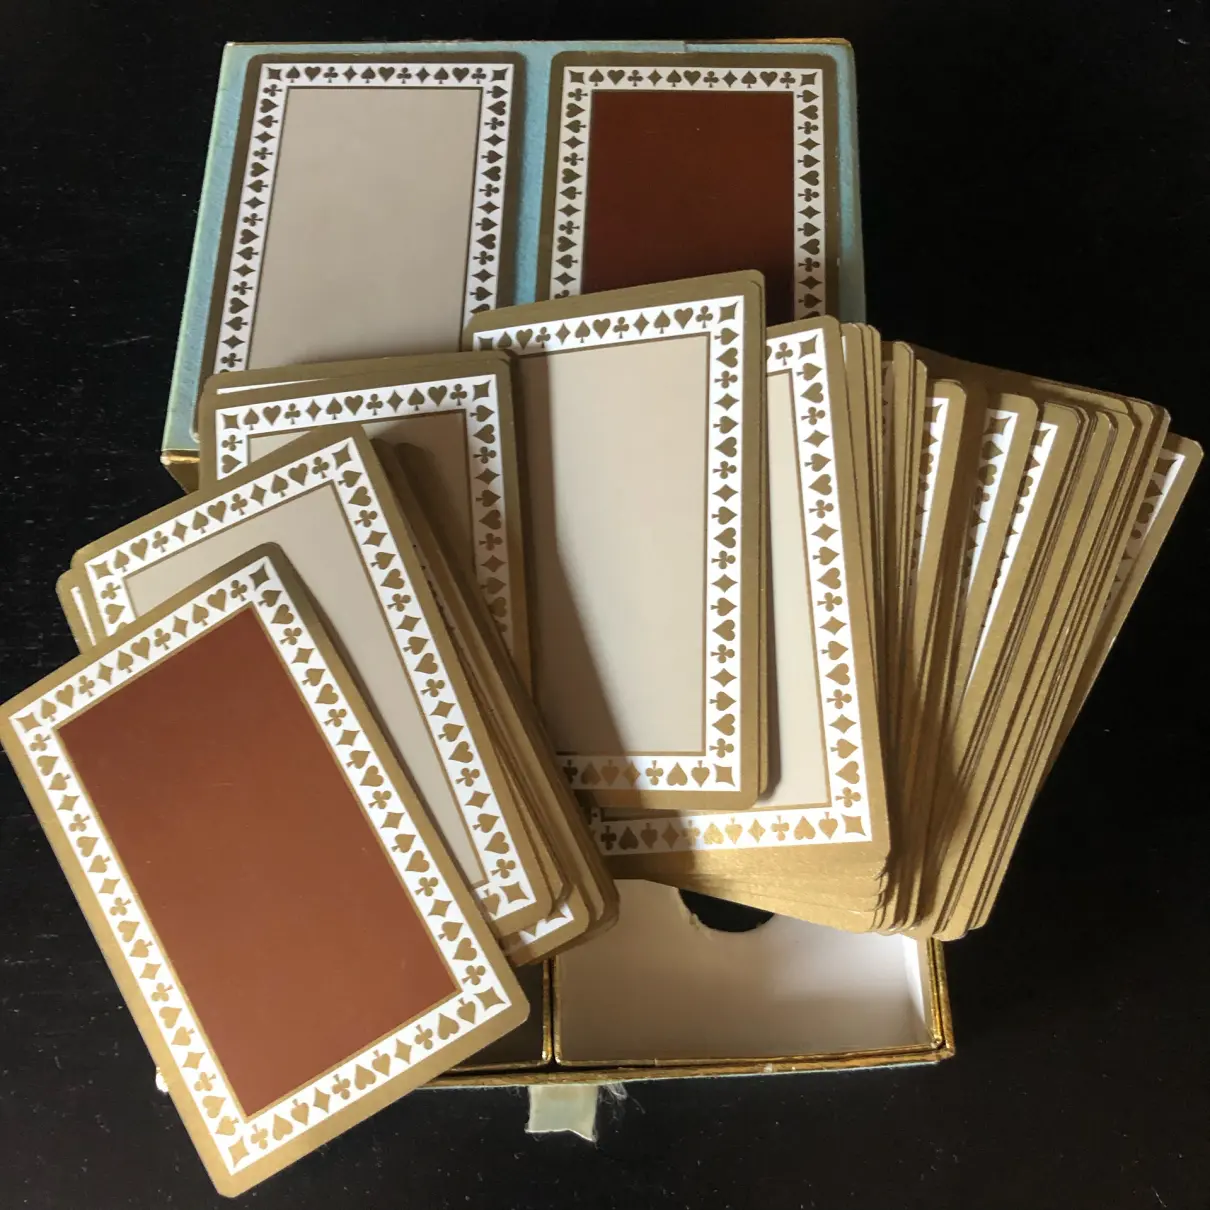 Buy Tiffany & Co Card game online